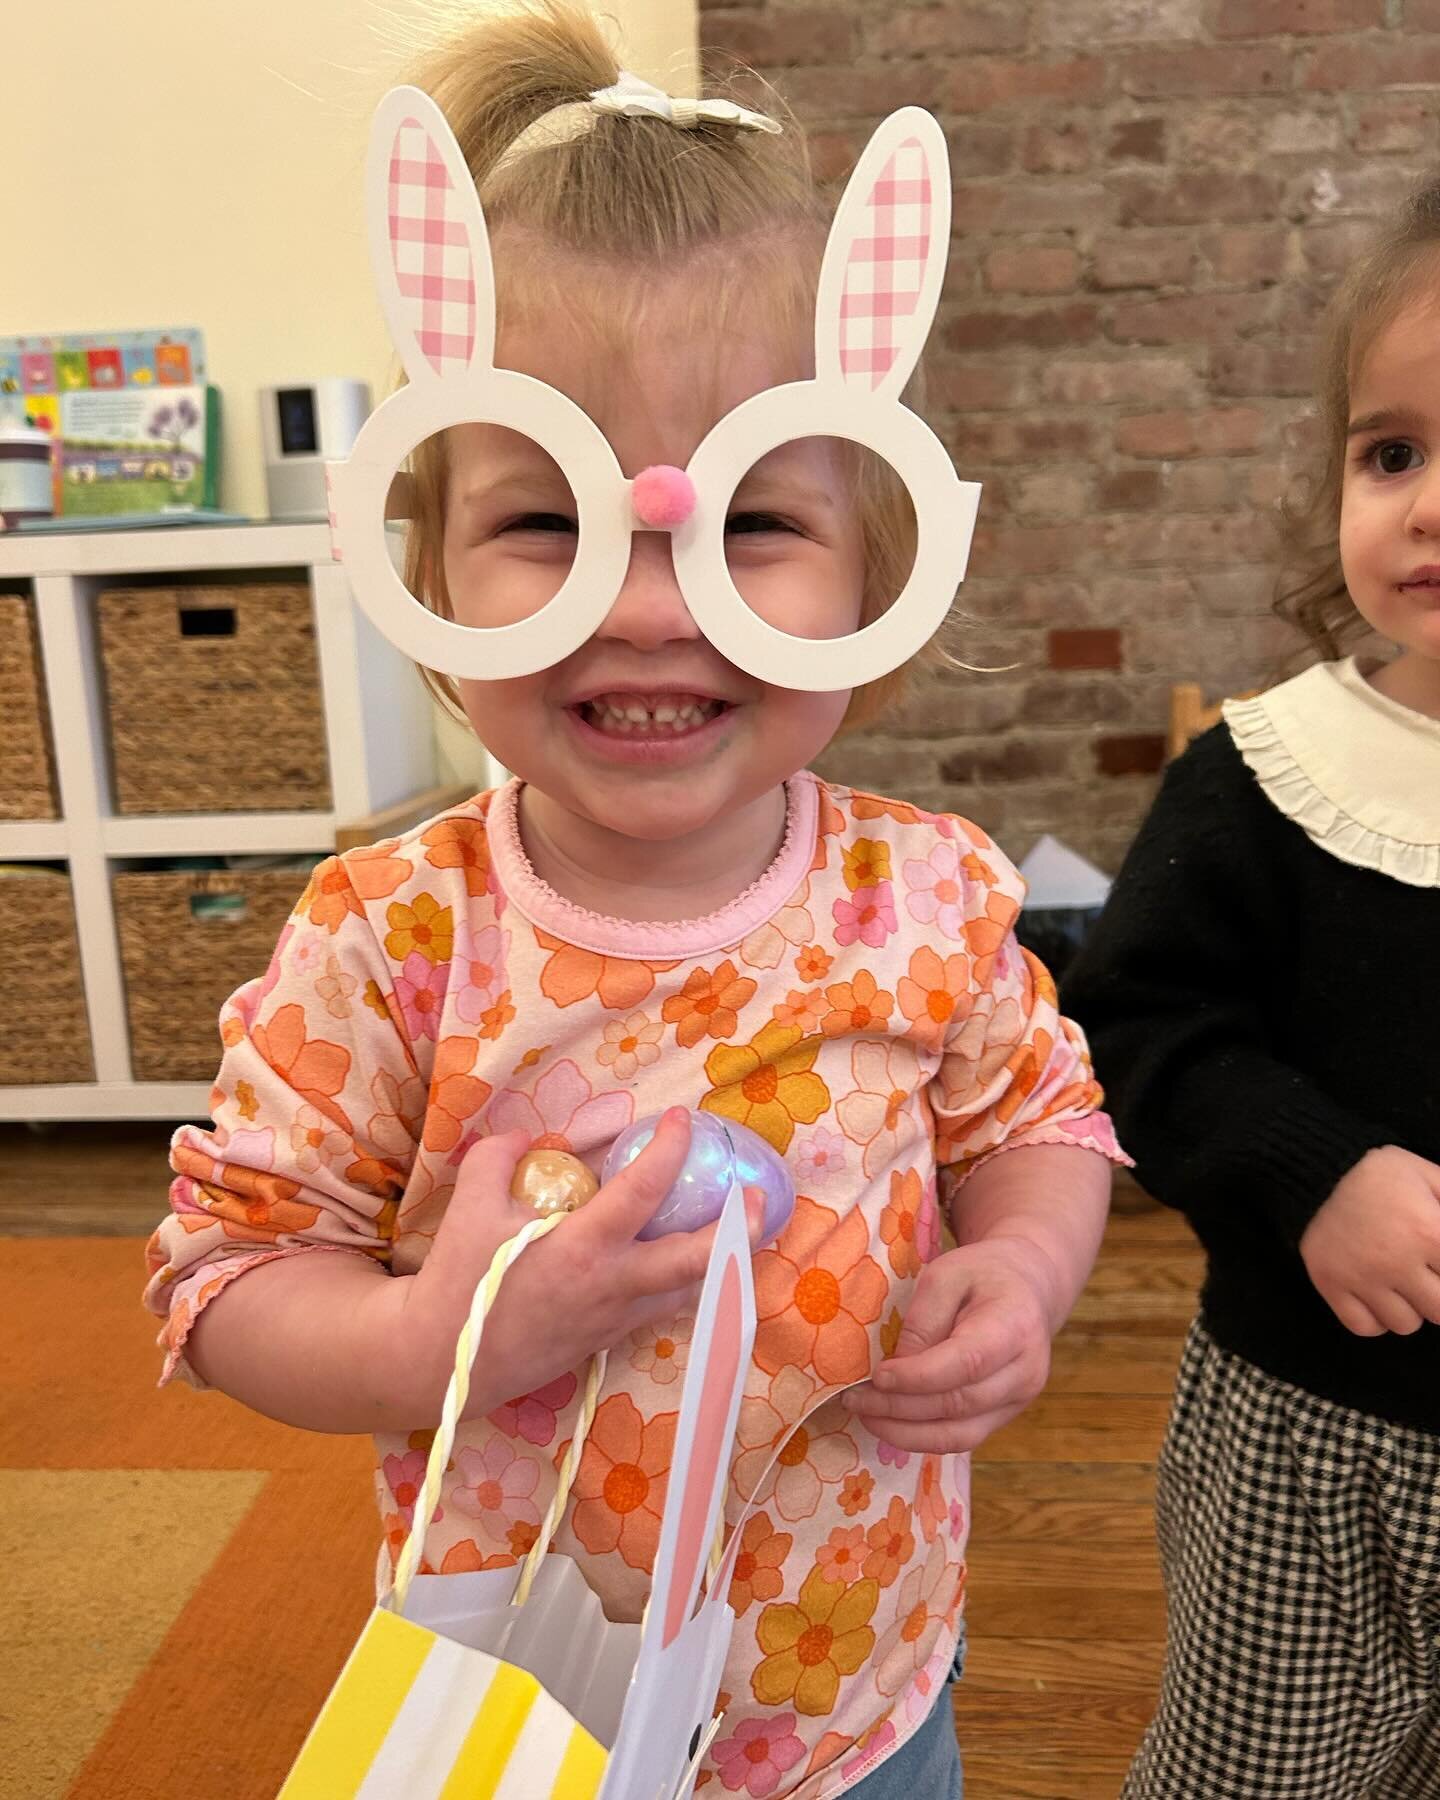 Happy Easter and Happy Spring to all!
🐣 💛🐰💚💐🩷🌷🧡🌱

#littlelearning #littlelearninginc #wherelearningfeelslikemagic #easter #spring #nyc #earlychildhood #love #fun